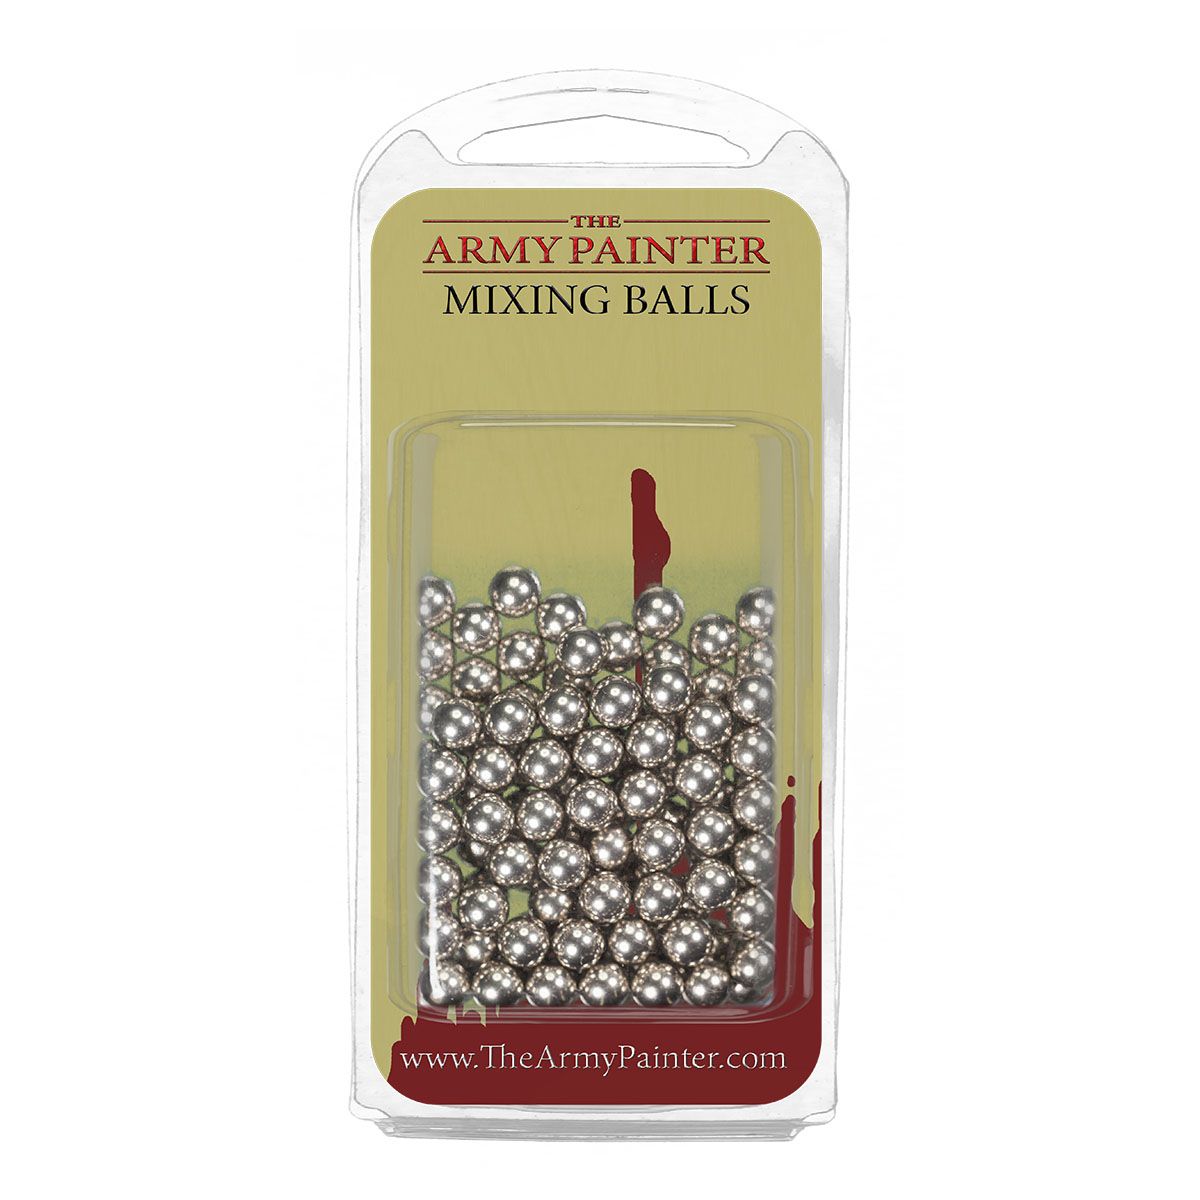 MIXING BALLS - TL5041 - The Army Painter